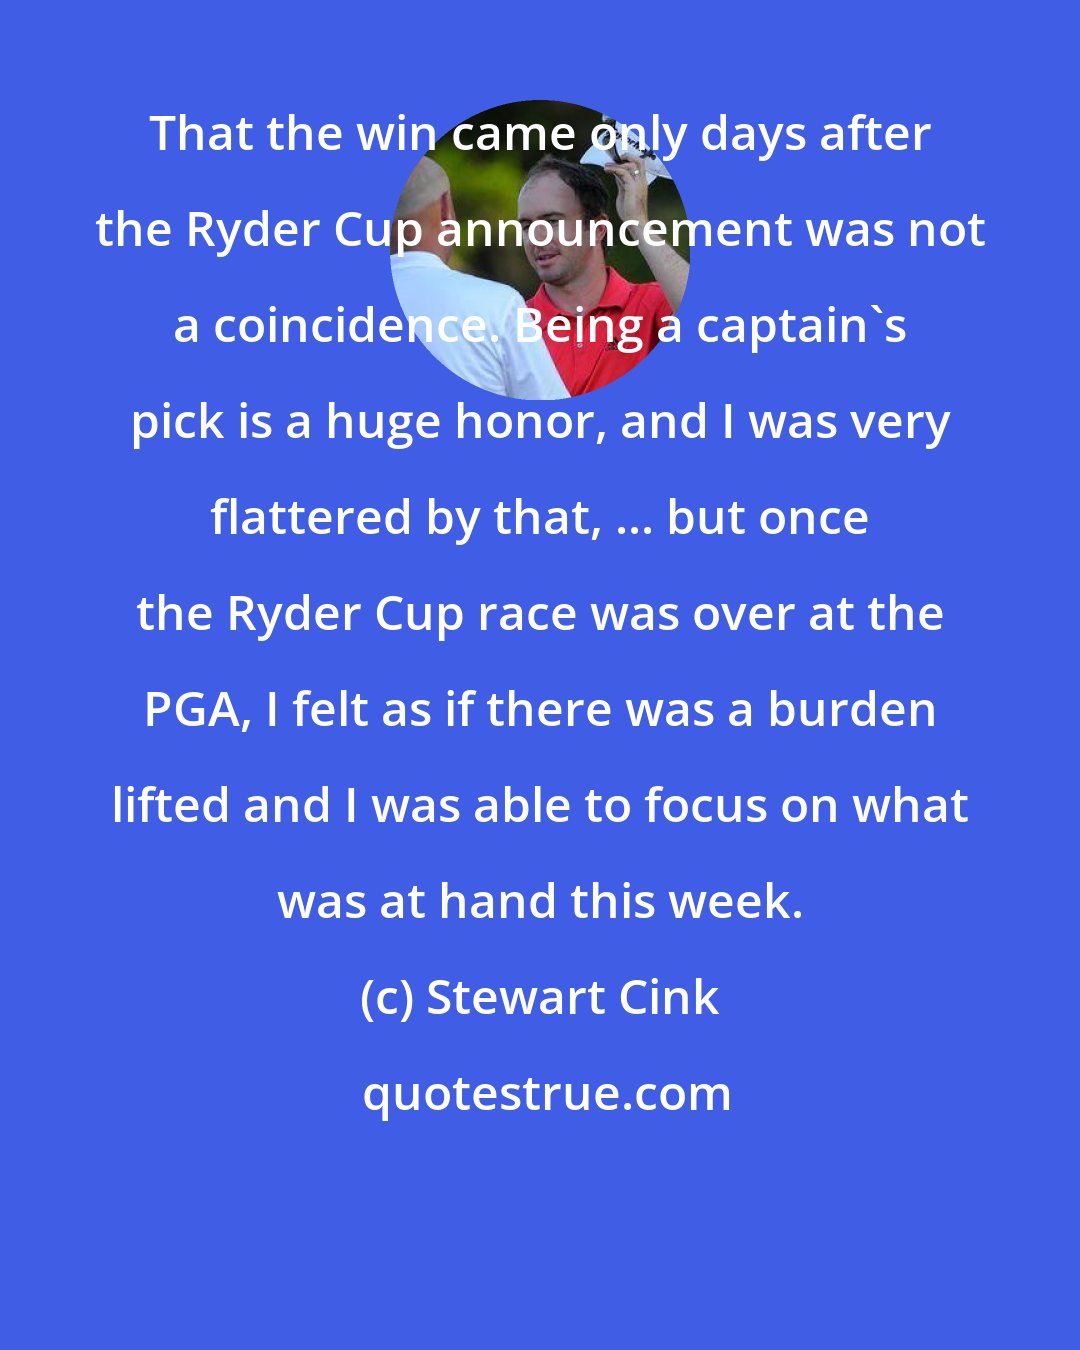 Stewart Cink: That the win came only days after the Ryder Cup announcement was not a coincidence. Being a captain's pick is a huge honor, and I was very flattered by that, ... but once the Ryder Cup race was over at the PGA, I felt as if there was a burden lifted and I was able to focus on what was at hand this week.